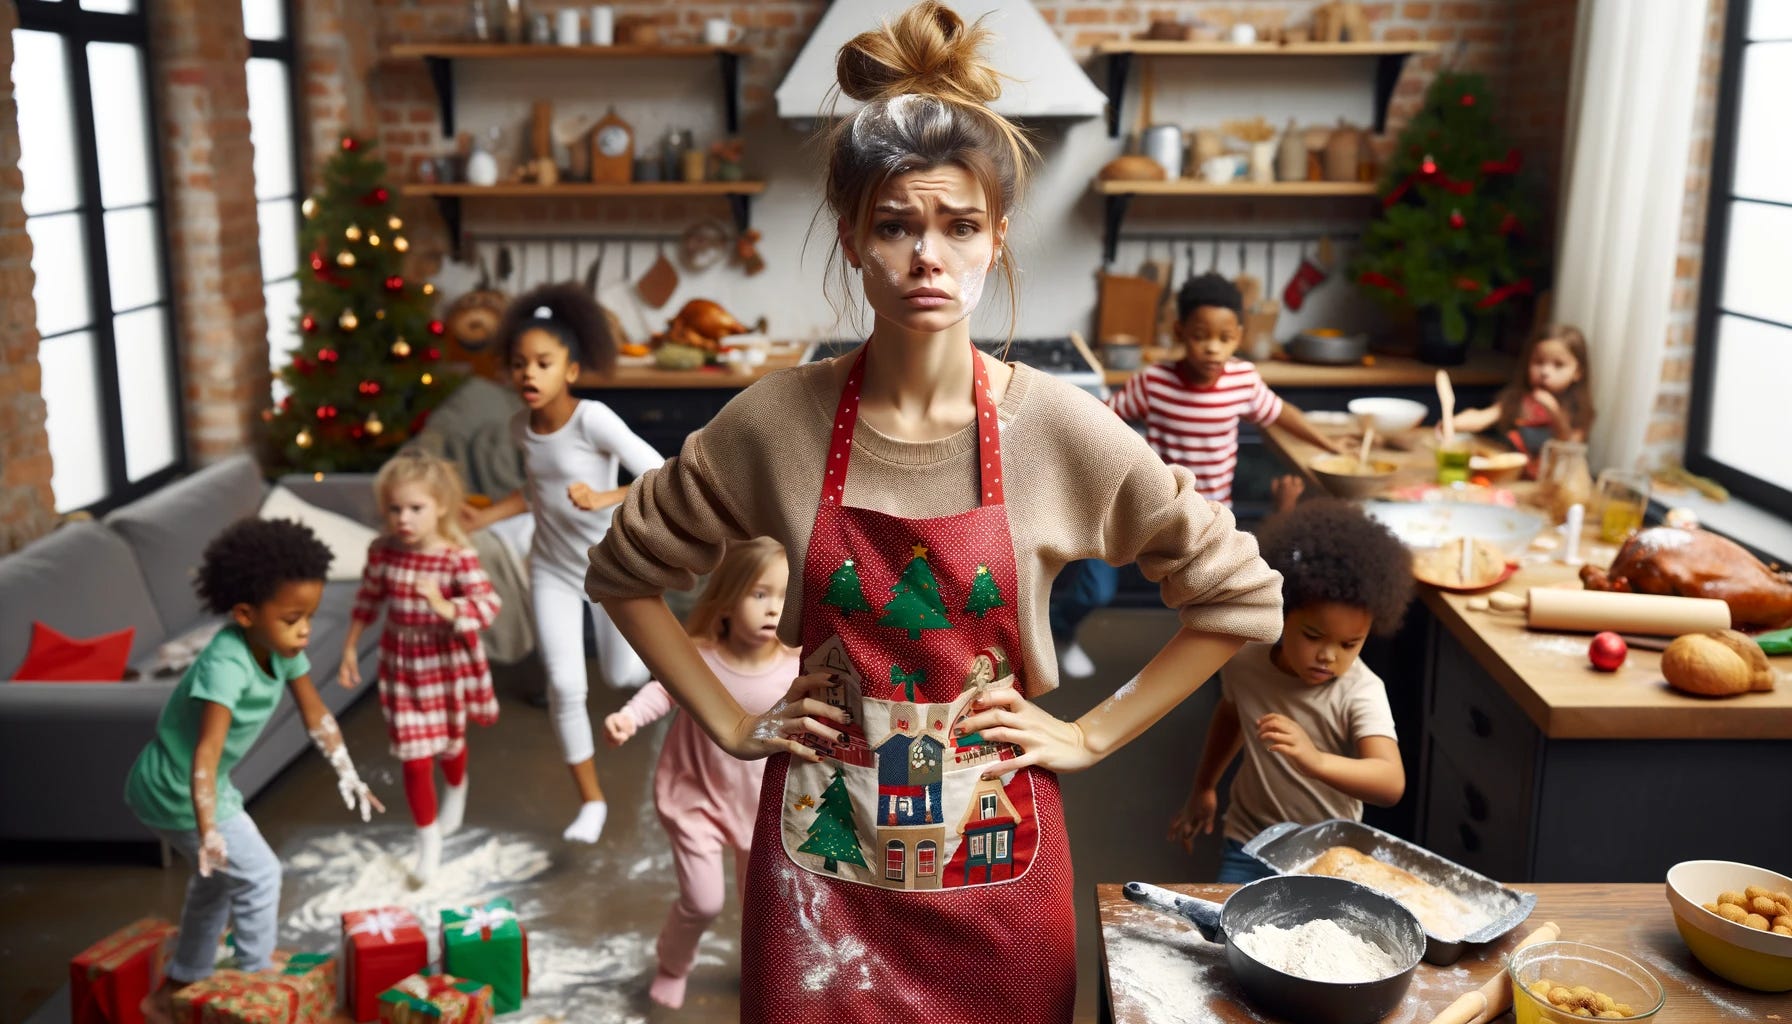 A young Caucasian woman in a festive apron is in a kitchen, looking stressed and disheveled as she prepares a Christmas feast. Her hair is in a messy bun, with flour on her face, and she’s surrounded by children of diverse descents, including Black, Hispanic, and Asian. The children are running around, some with toys in their hands, creating a chaotic scene. The room is decorated for Christmas, with a partially decorated tree in the background and presents scattered around, some half unwrapped.